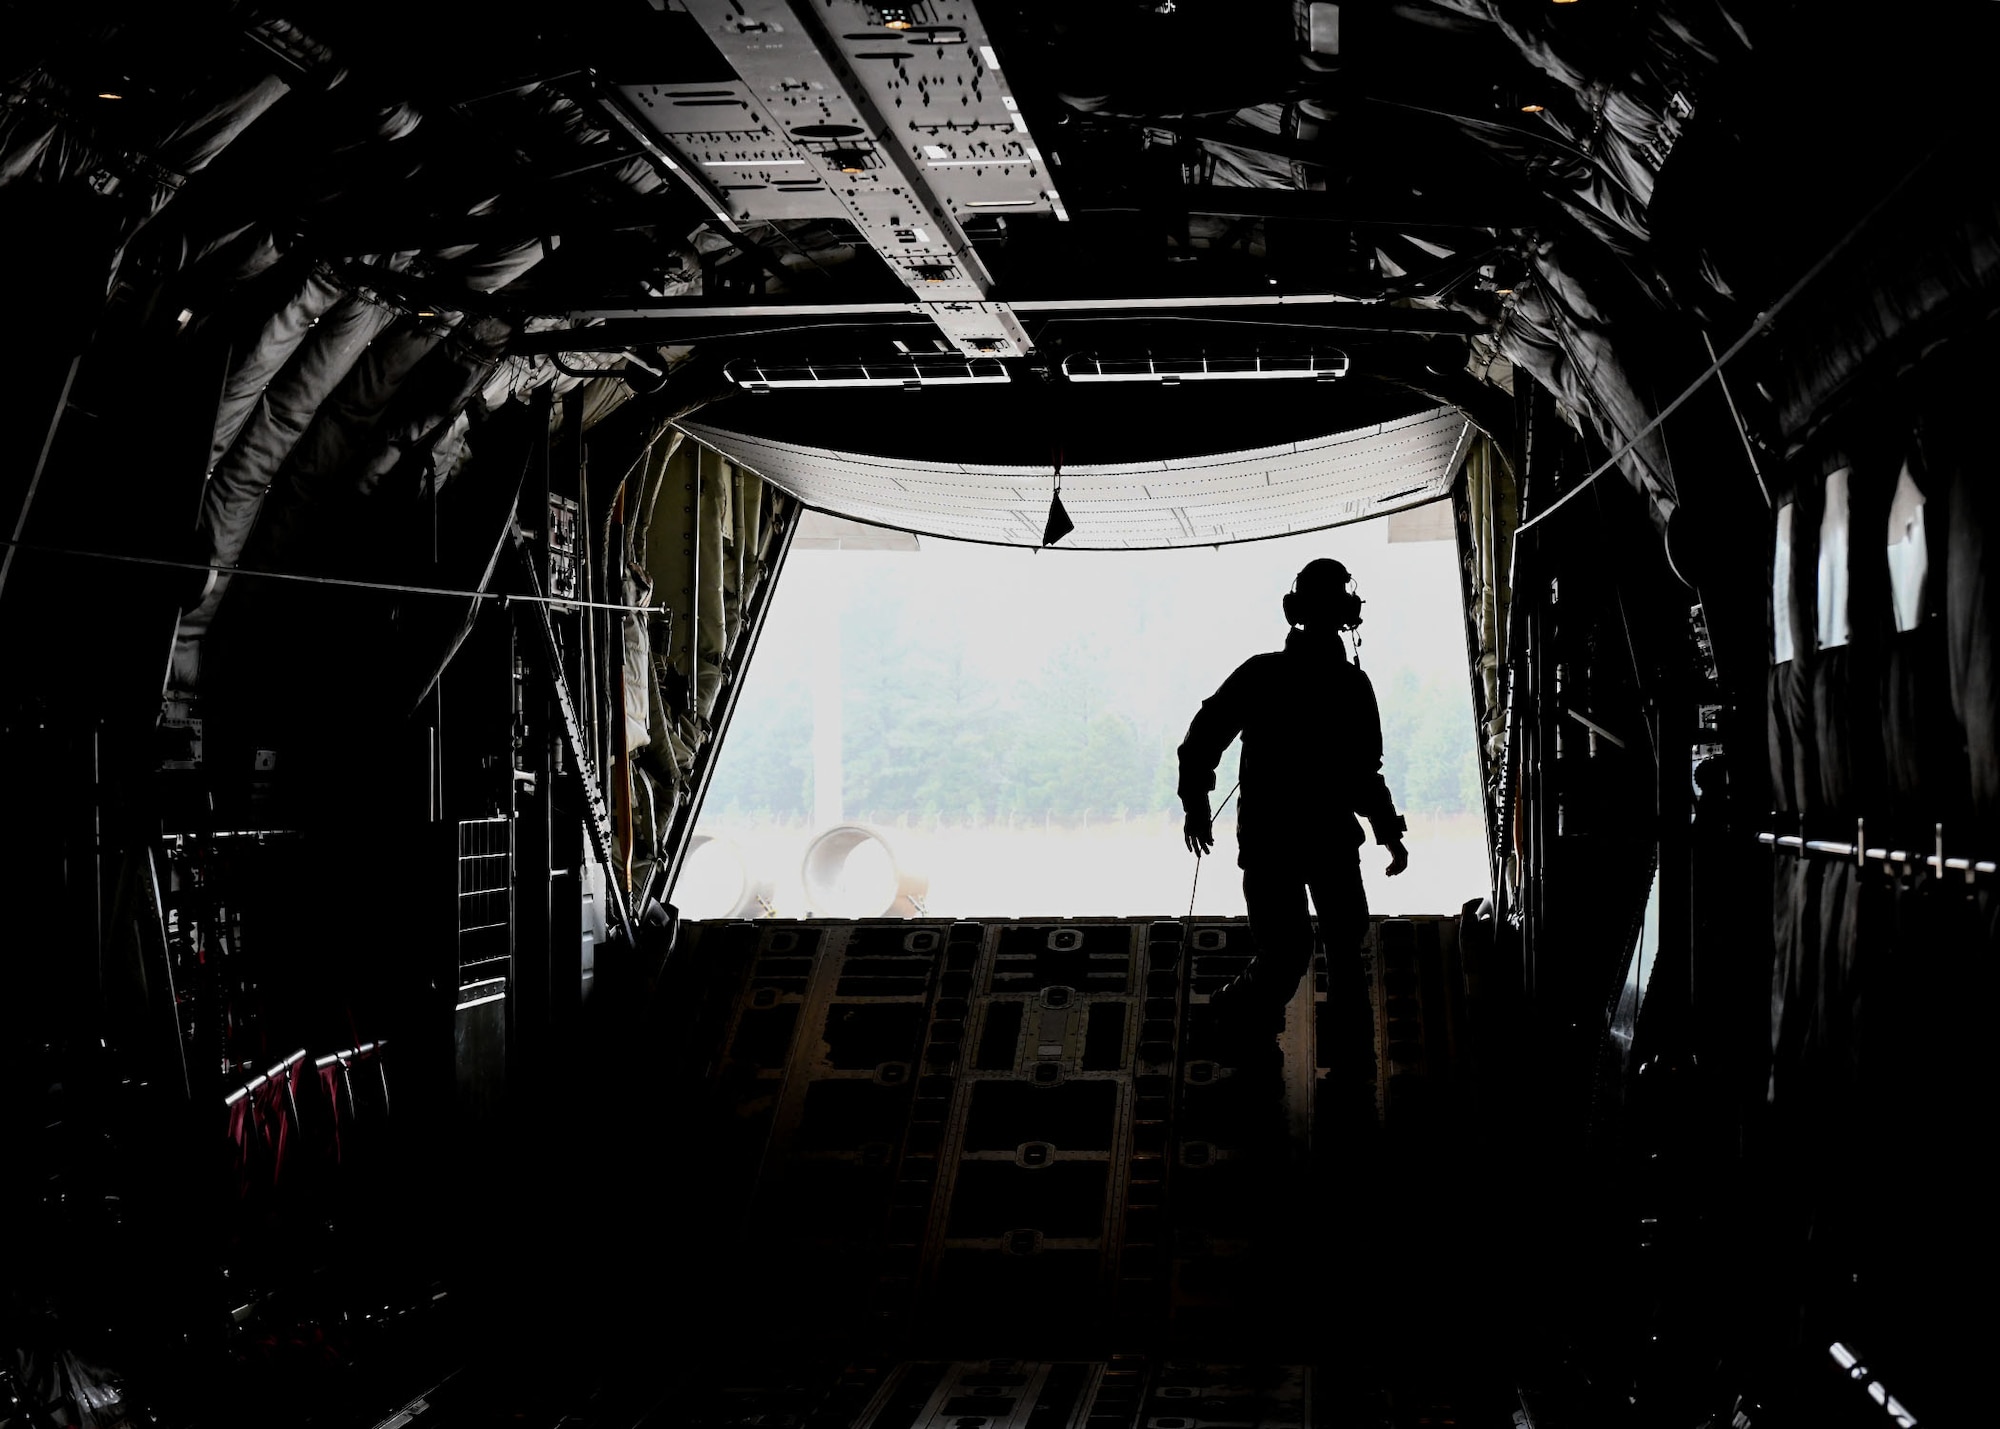 An Airman stands in the back of a C-130.